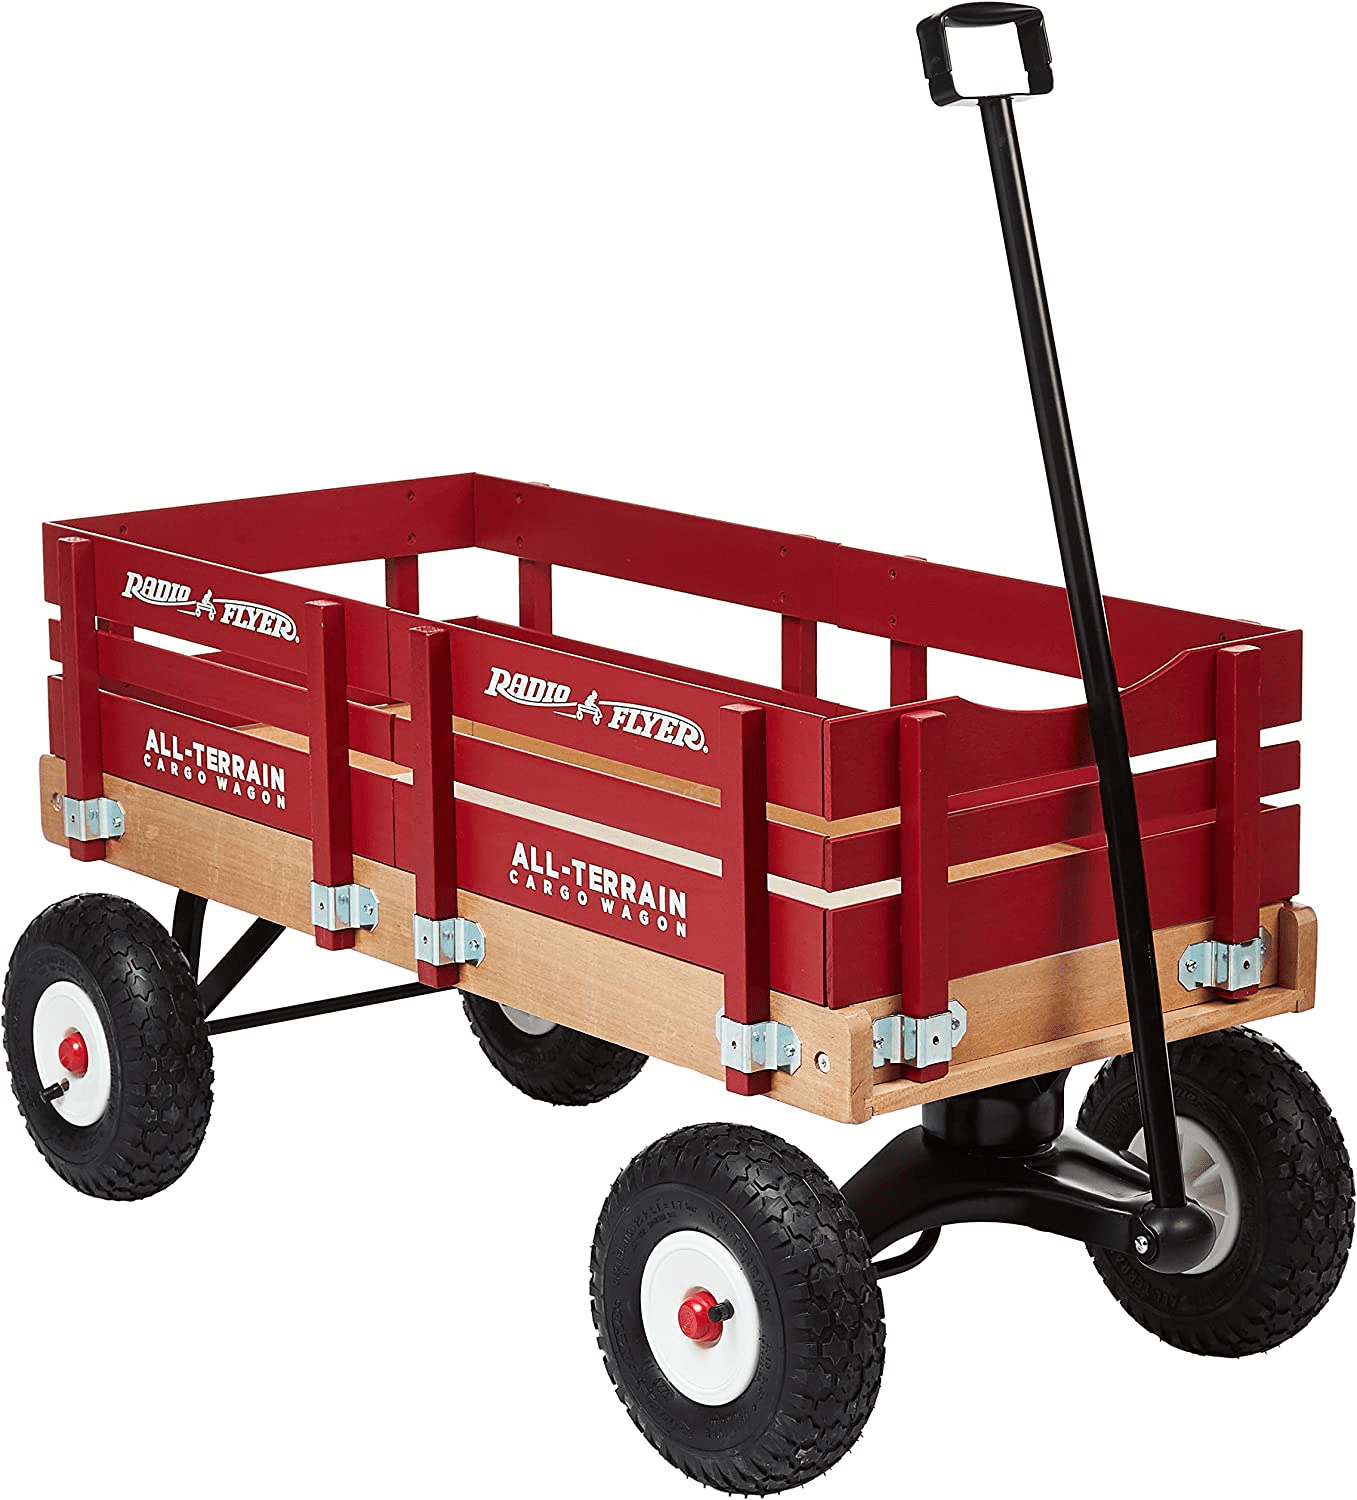 Kids Red Wagon from Radio Flyer